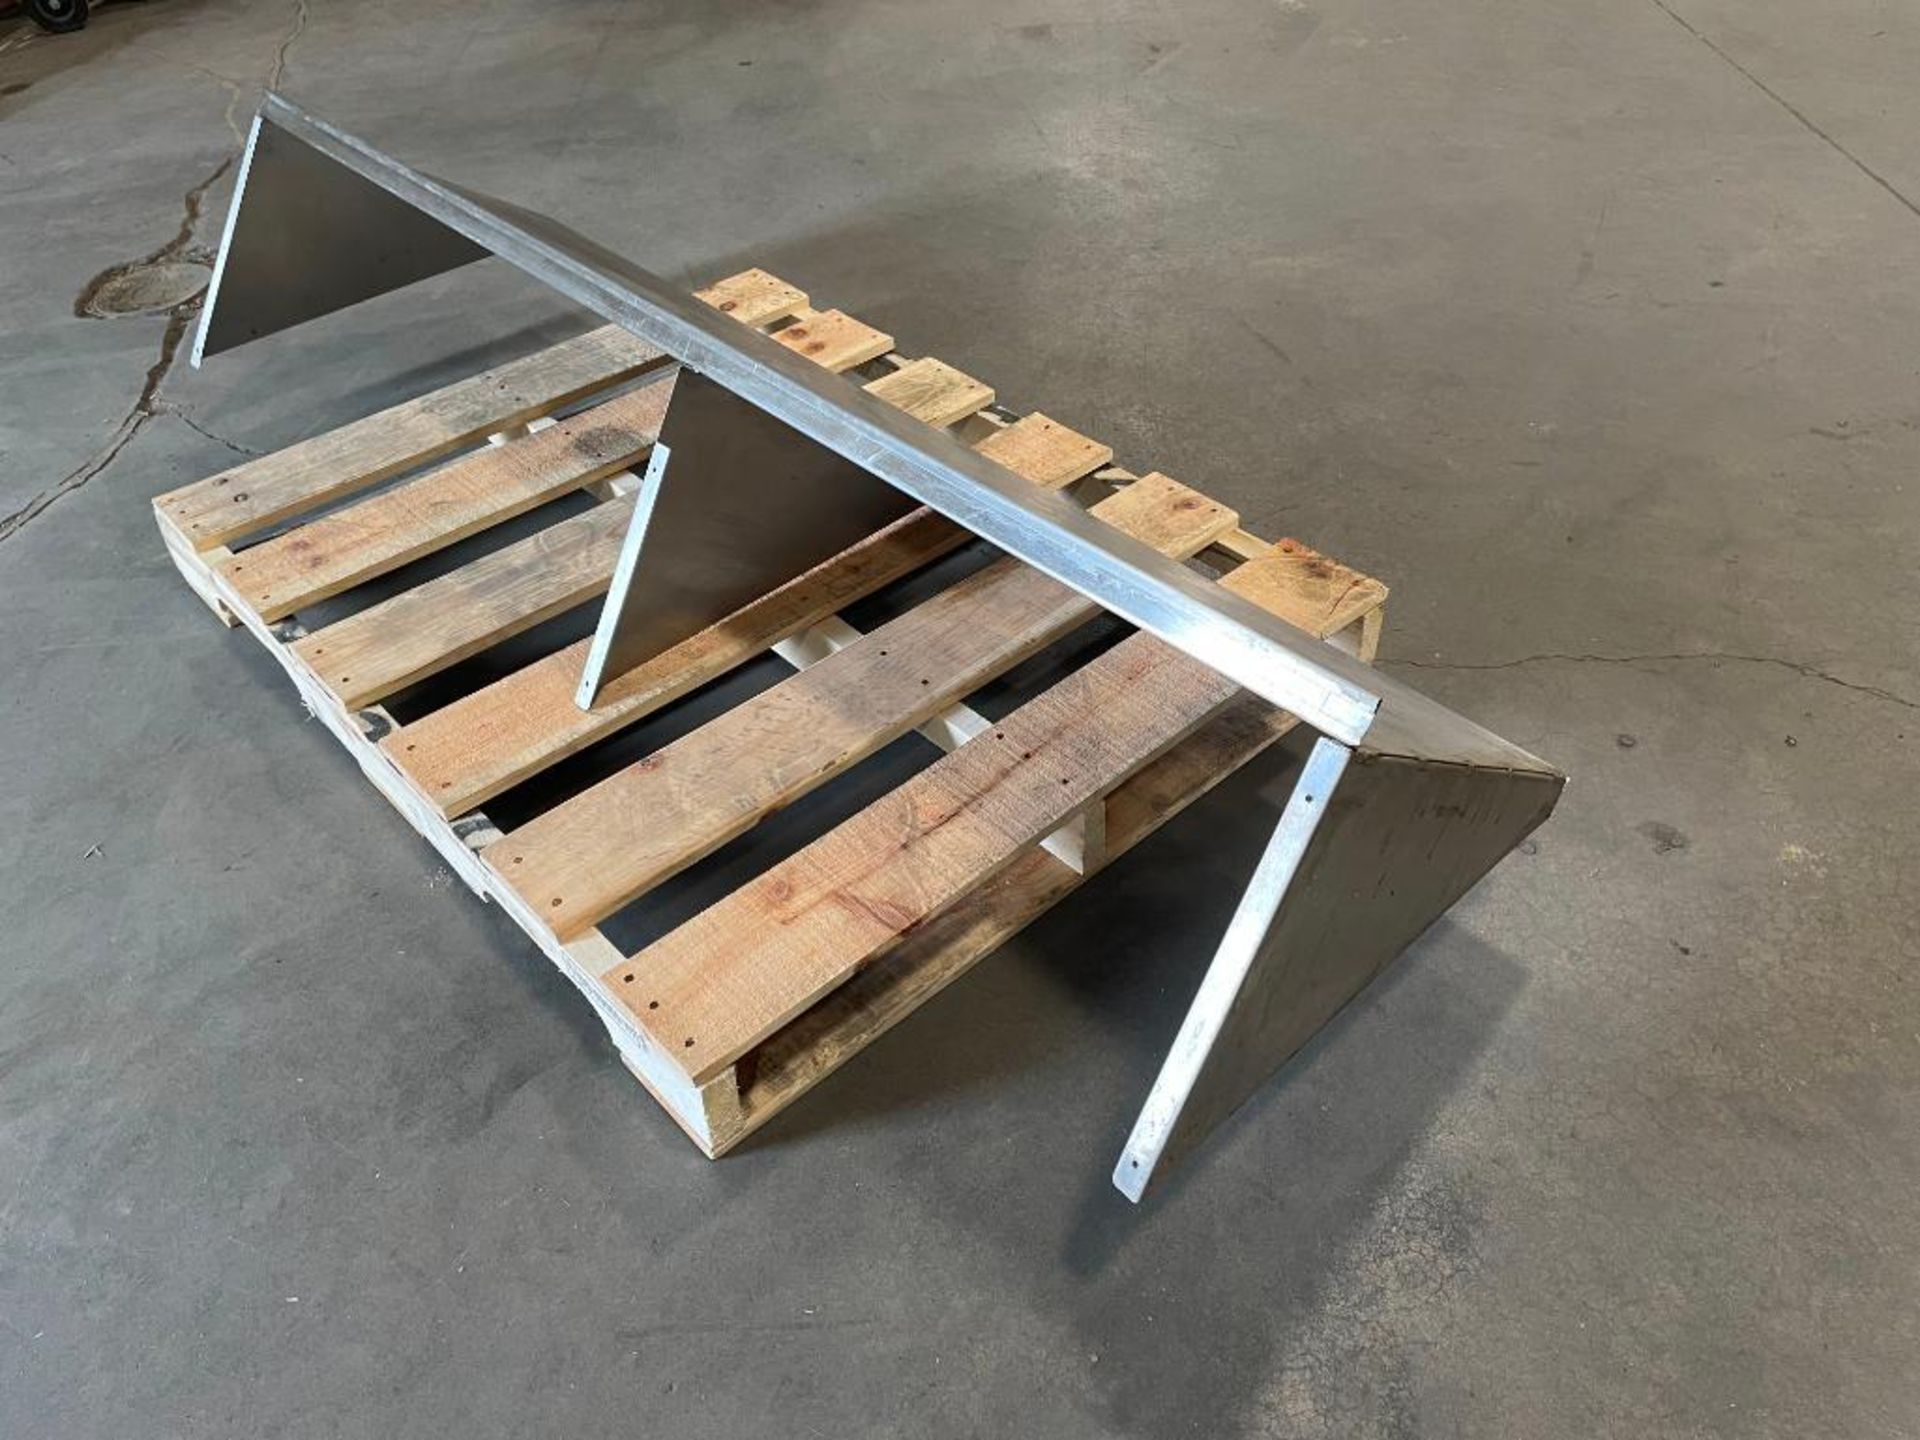 71" X 18" STAINLESS STEEL WALL SHELF - Image 2 of 3